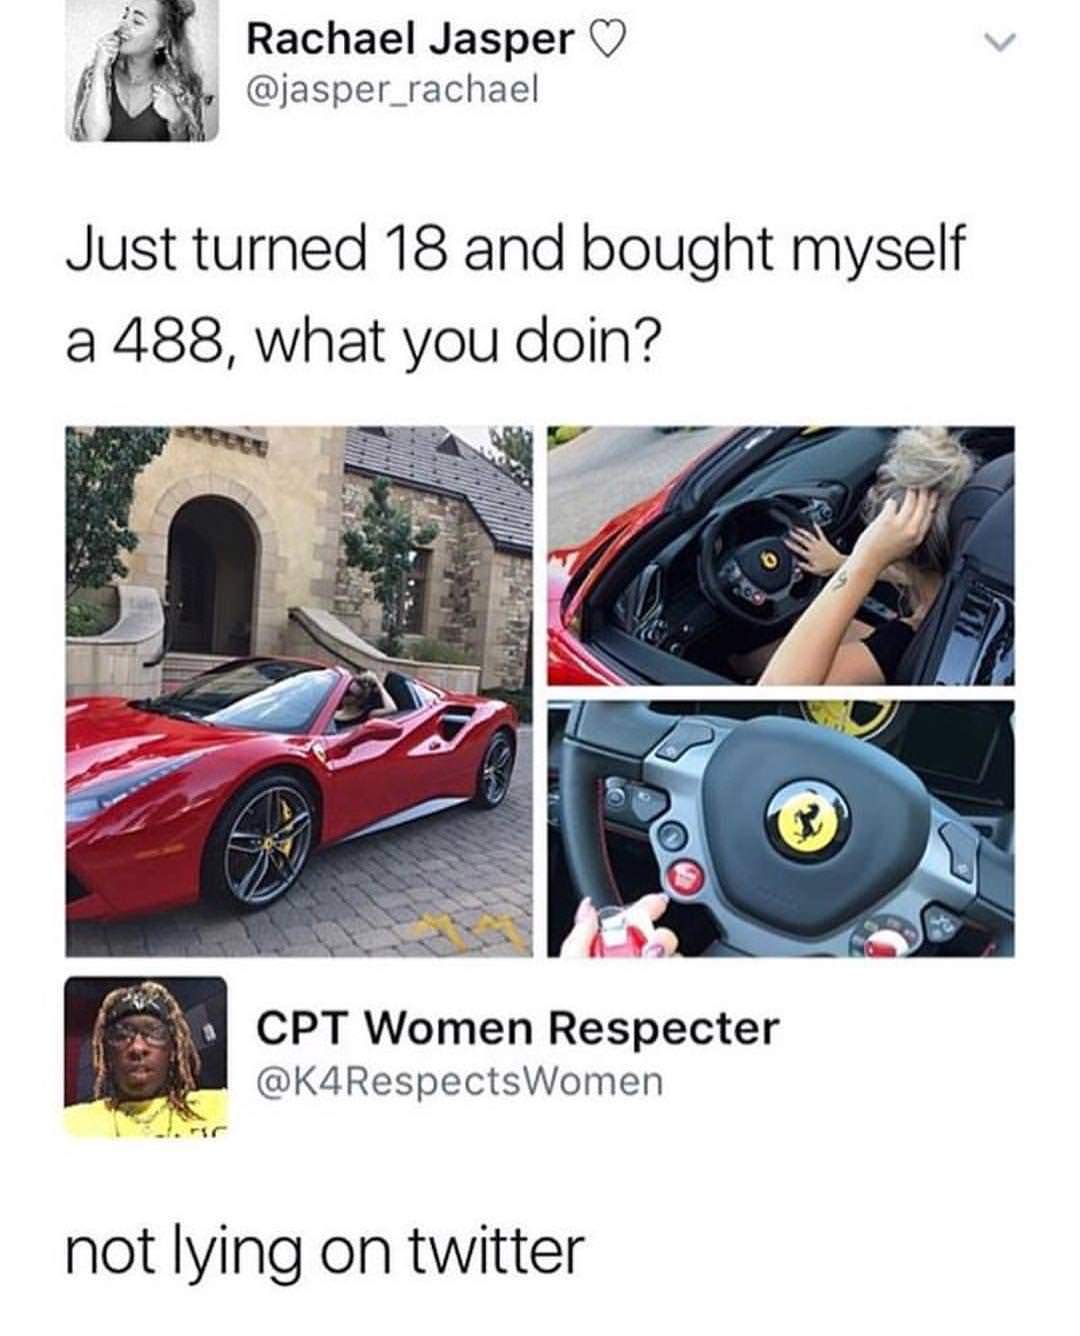 not lying on twitter meme - Rachael Jasper Just turned 18 and bought myself a 488, what you doin? Cpt Women Respecter Women not lying on twitter